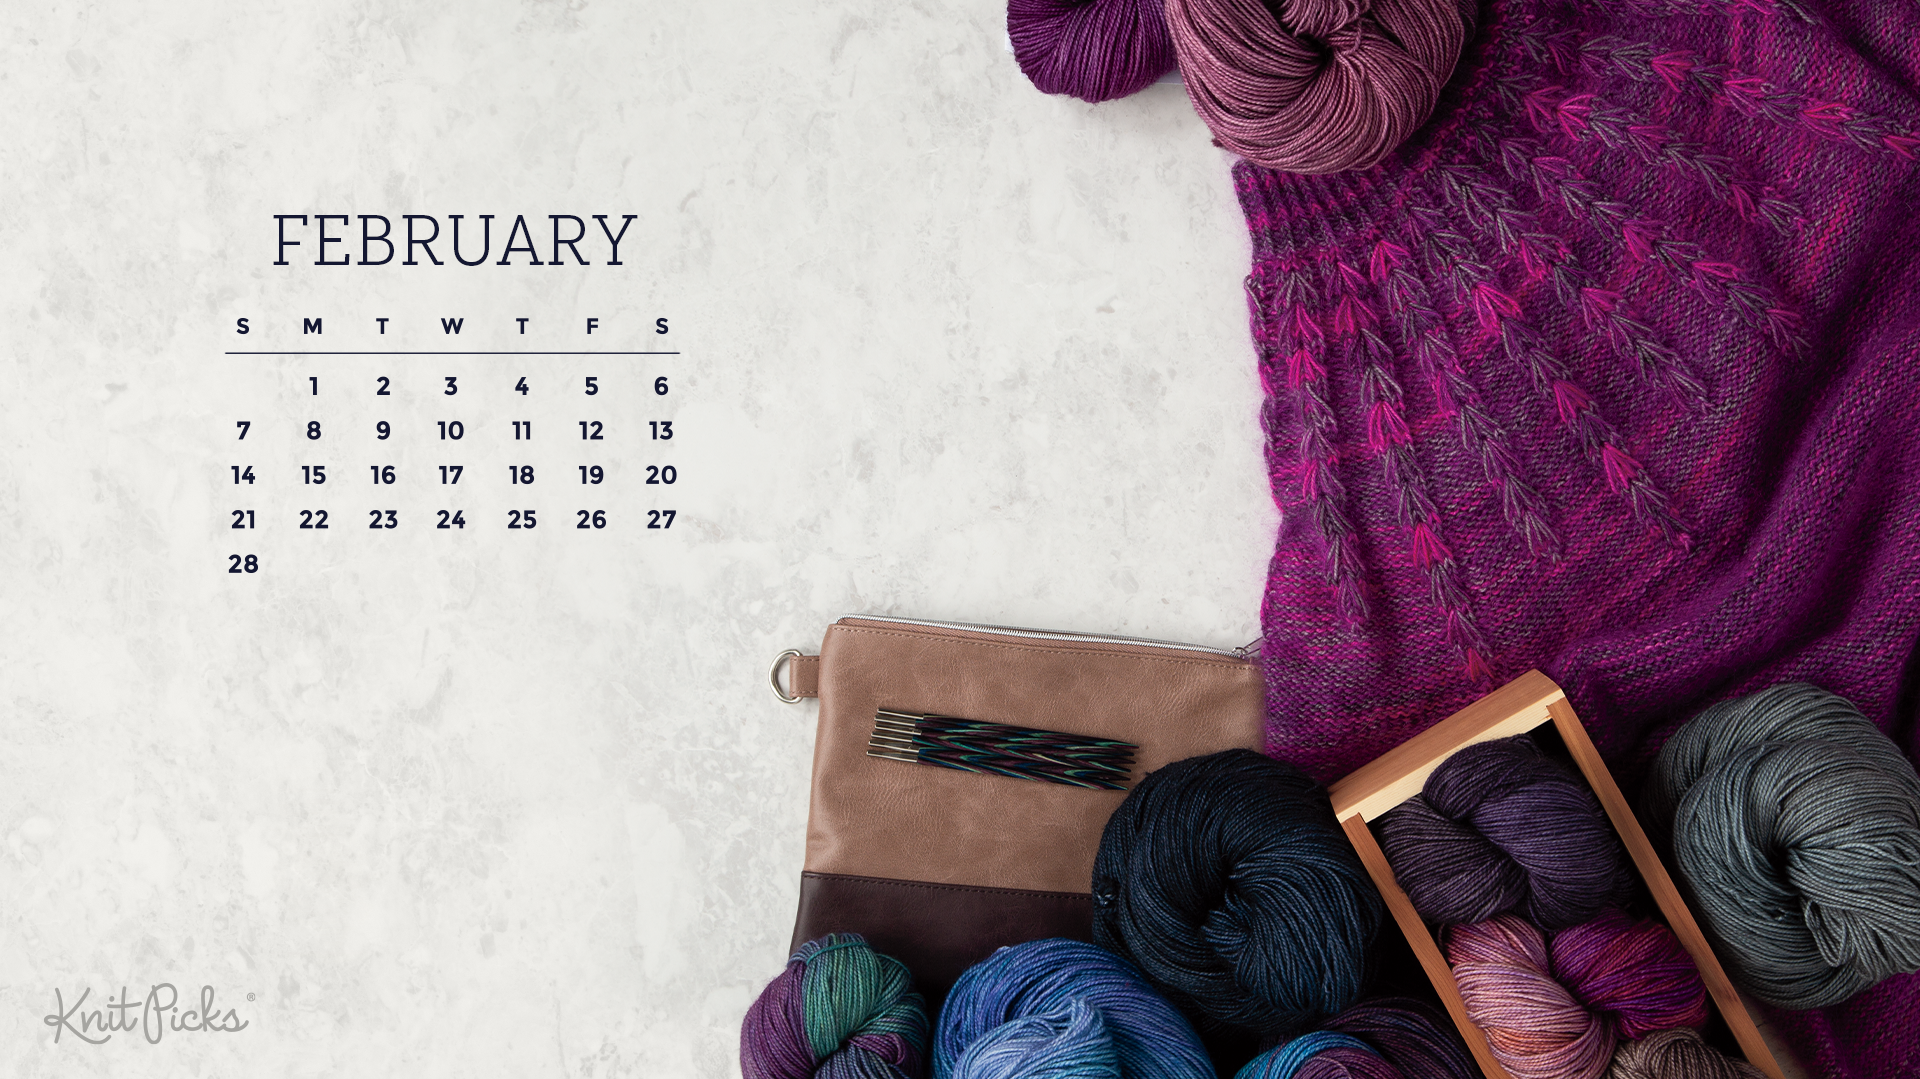 2021 Calendar Wallpaper Free Download This Free Customizable 2021 Calendar Template For Kindergarten Kids And Available In Word Format Here you can explore hq february 2020 calendar transparent illustrations, icons and clipart with filter setting like size, type, color etc. render